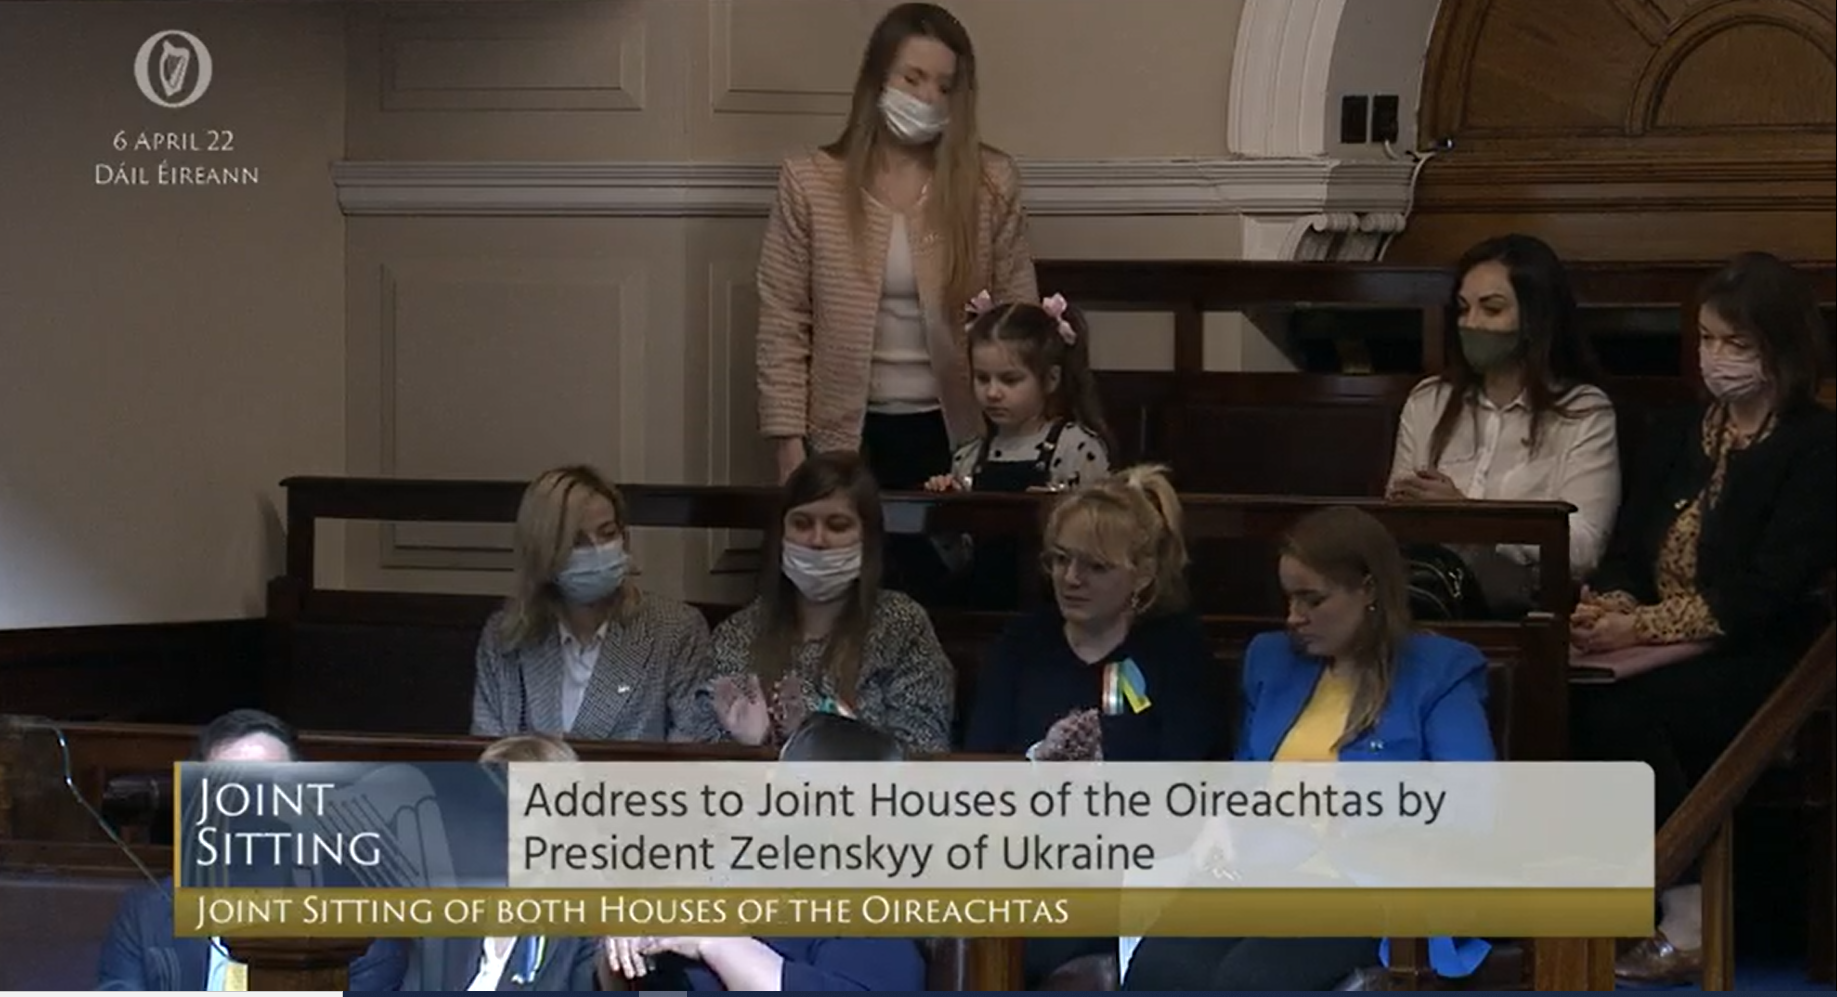 Five-year-old Anastasia with her mother Yana in the Dáil chamber. Image: Oireachtas